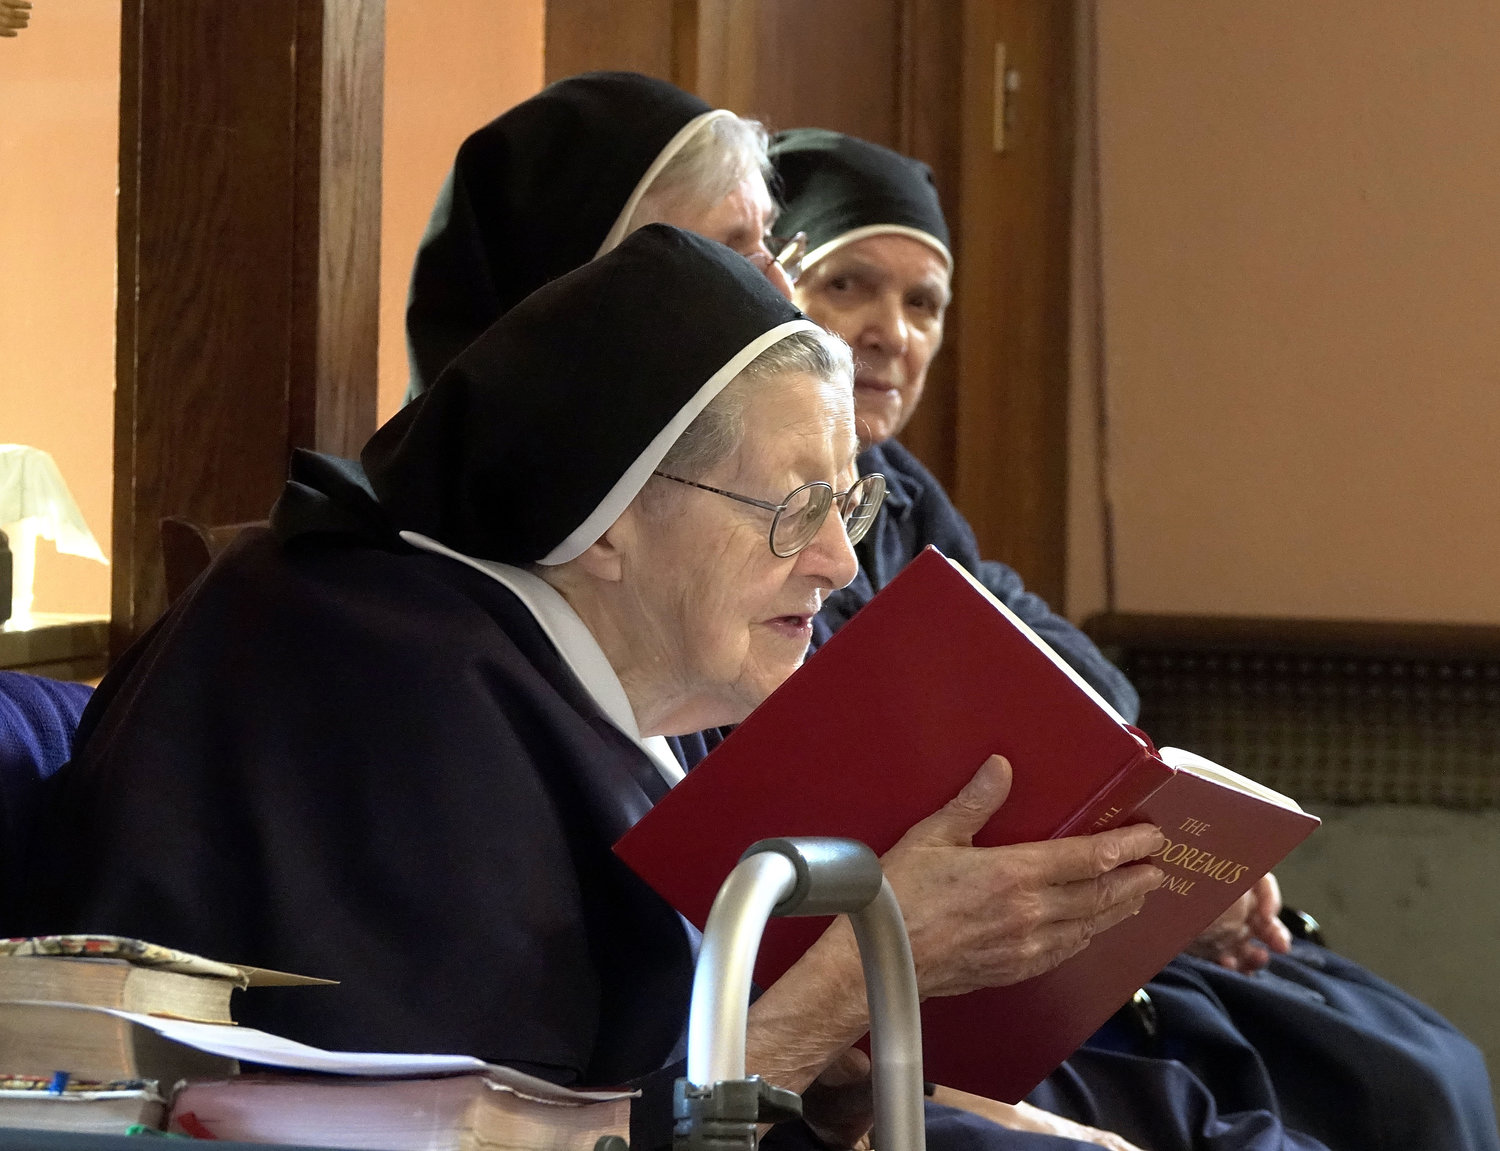 Sister Eileen Marie Laird, P.V.M.I., was one of the Parish Visitors of Mary Immaculate who attended the Mass Cardinal Dolan celebrated for the religious order’s 100th anniversary at its Marycrest motherhouse in Monroe Aug. 15.